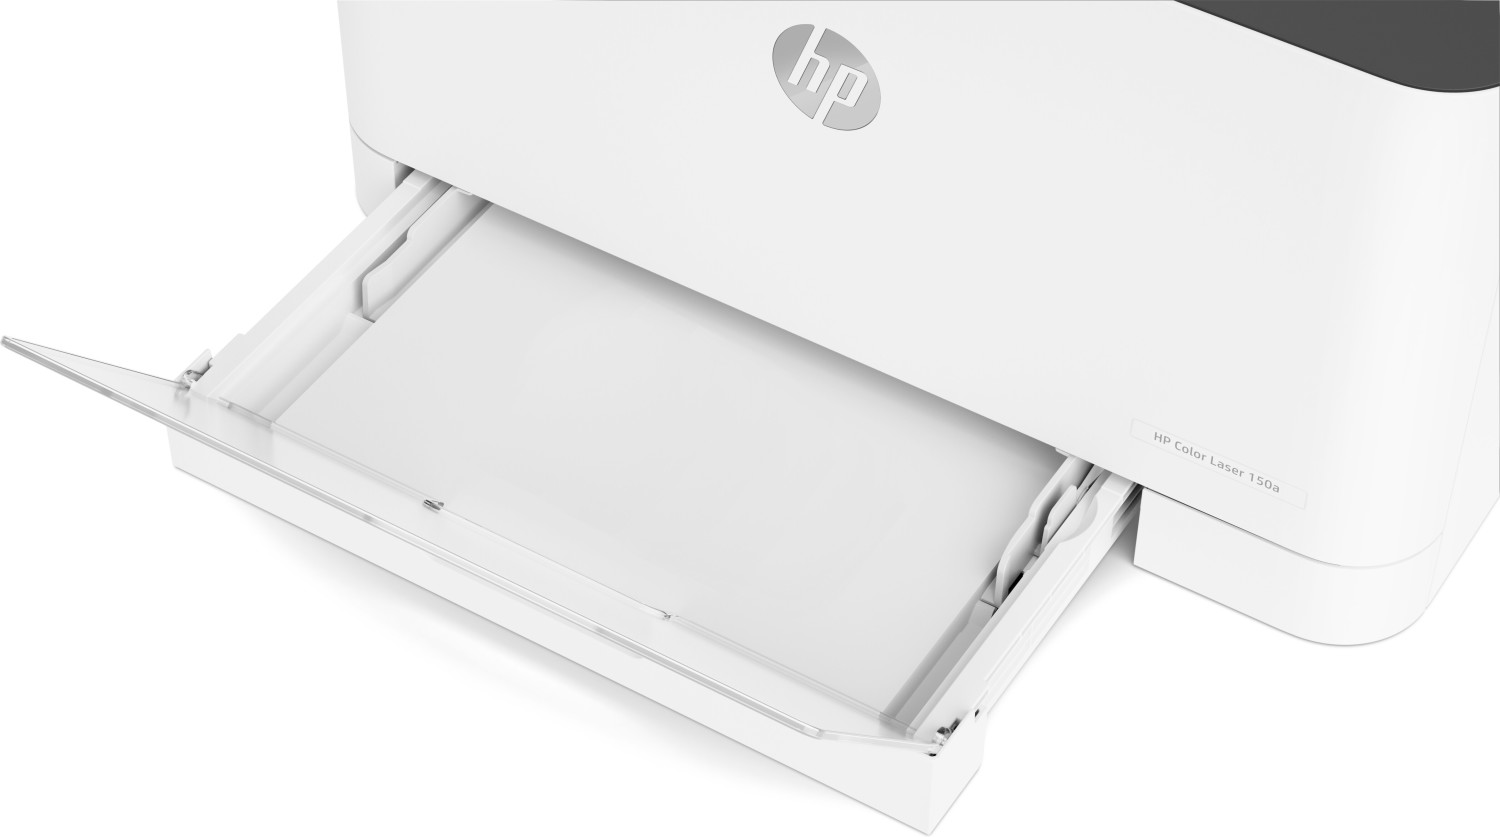 Imprimante HP Color Laser 150nw - HP Store France